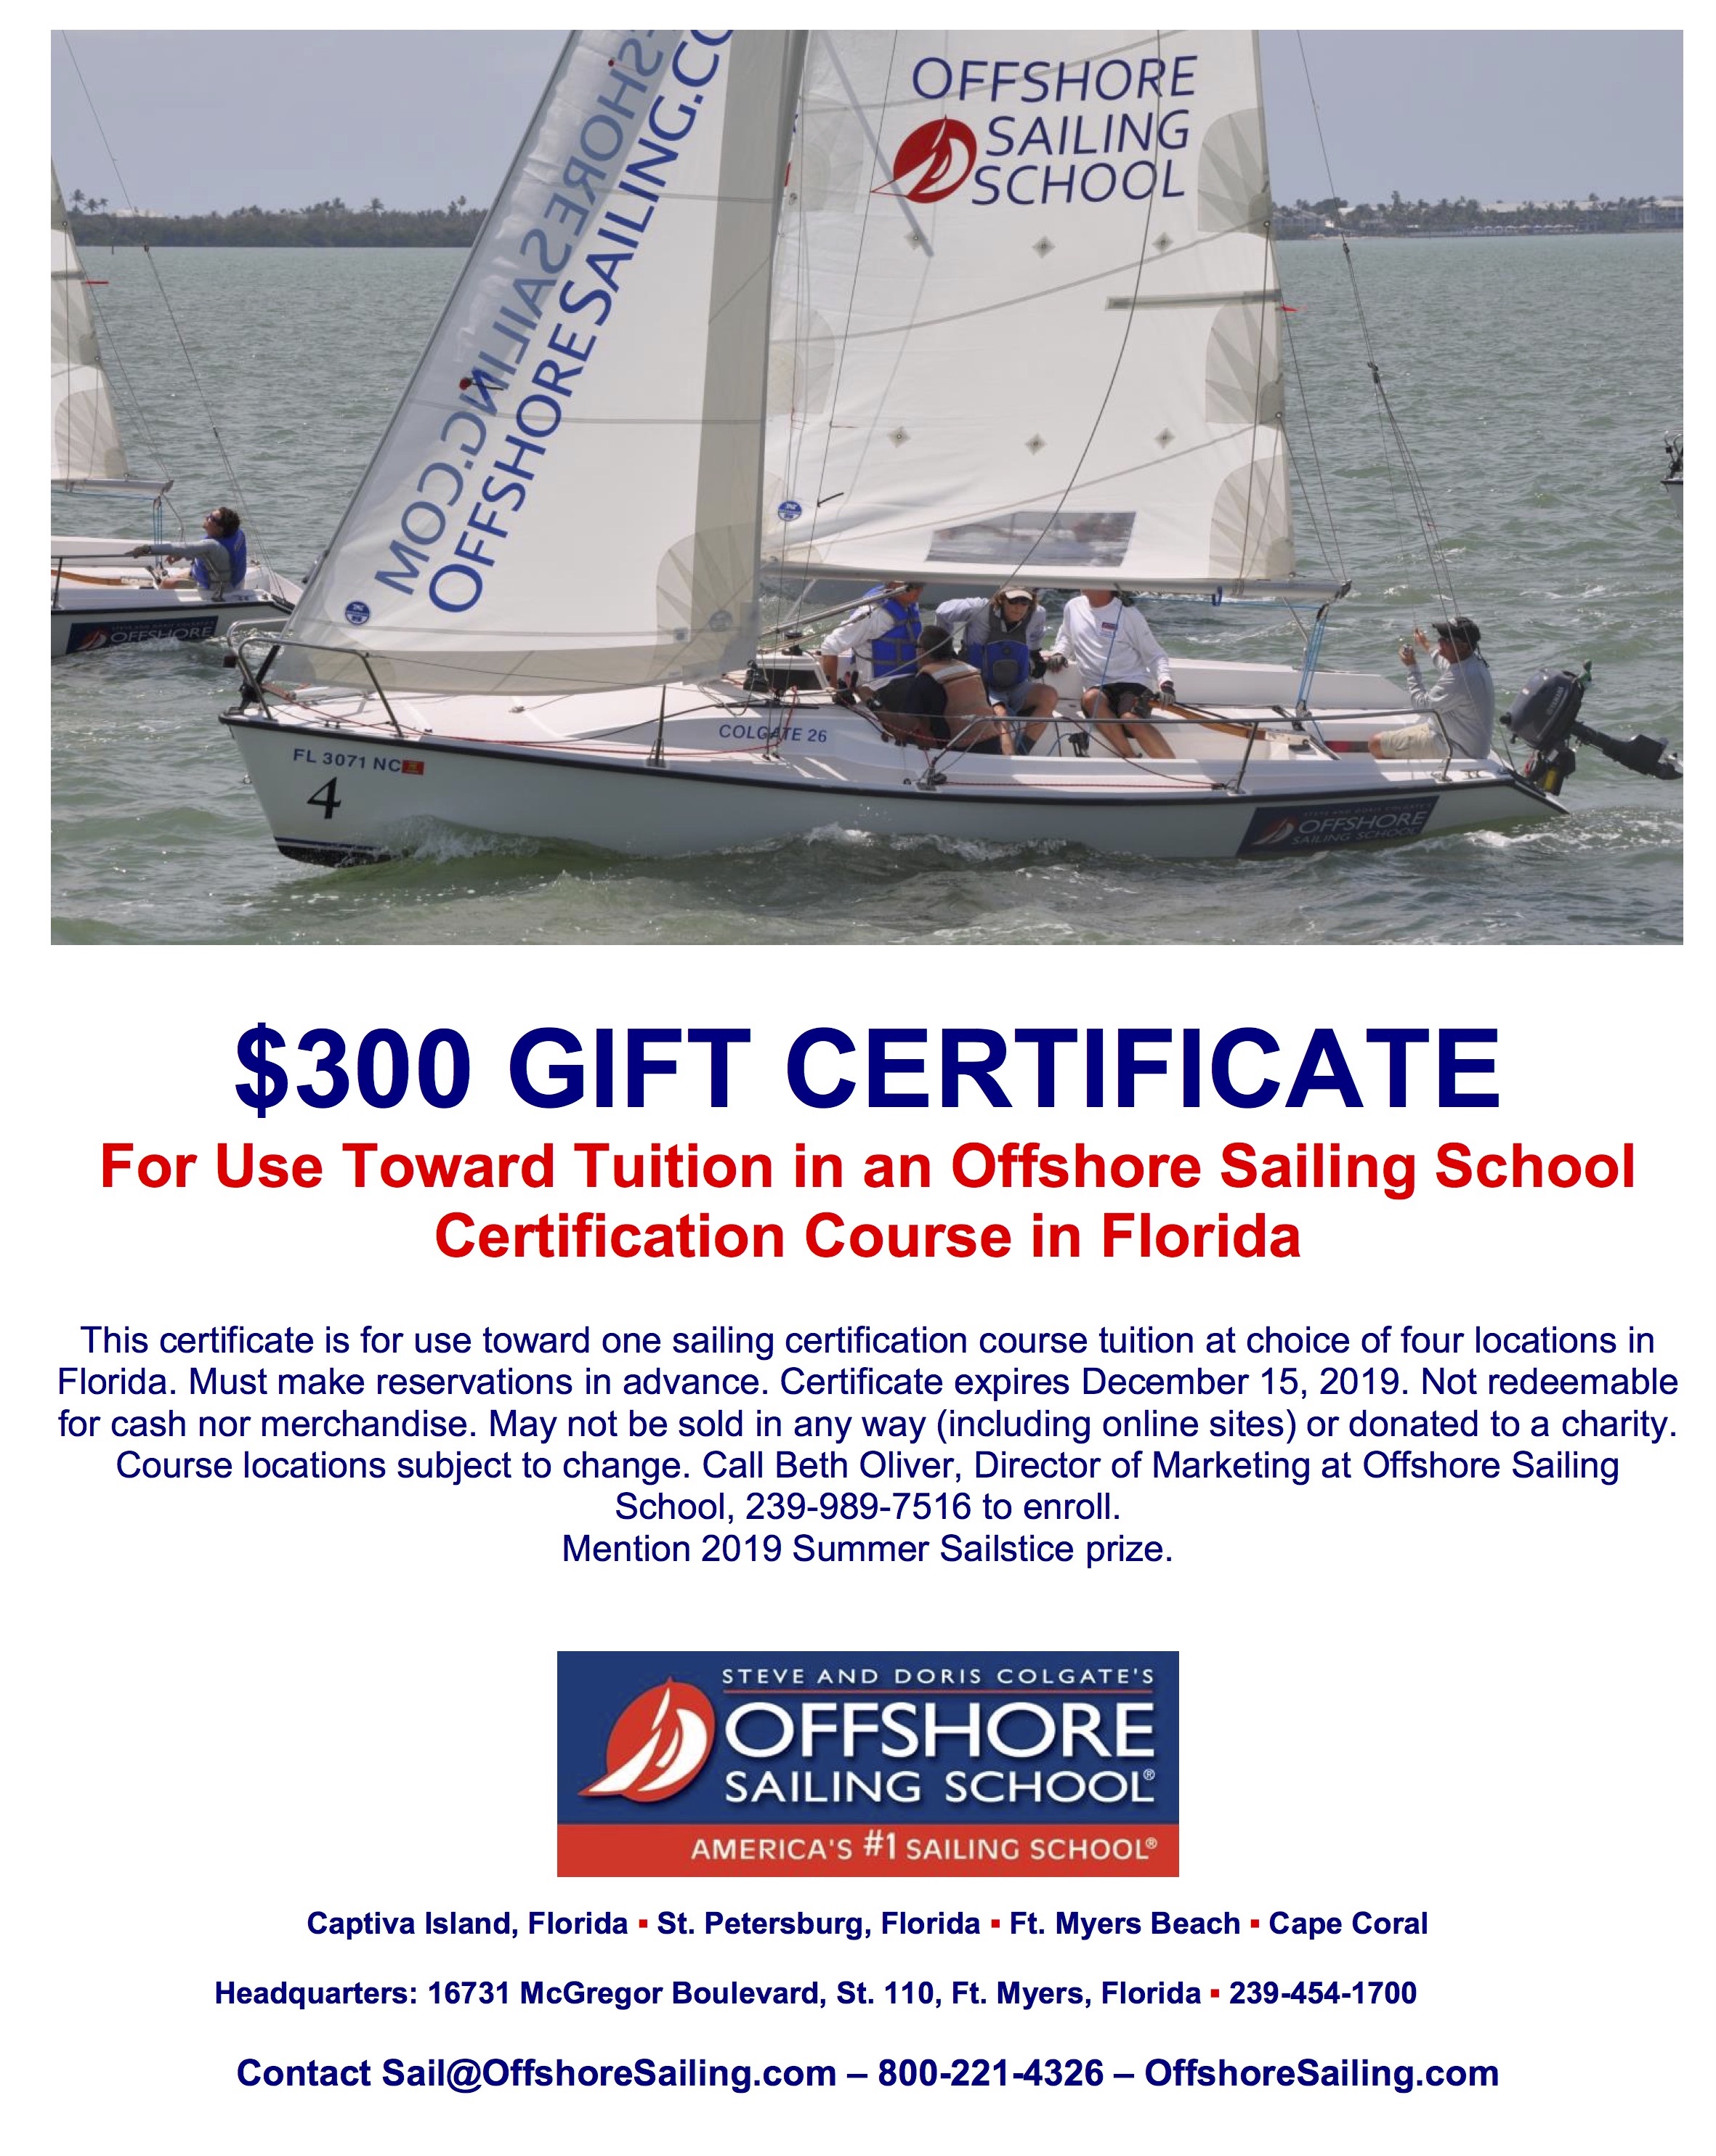 Offshore Sailing School 2019 Prize